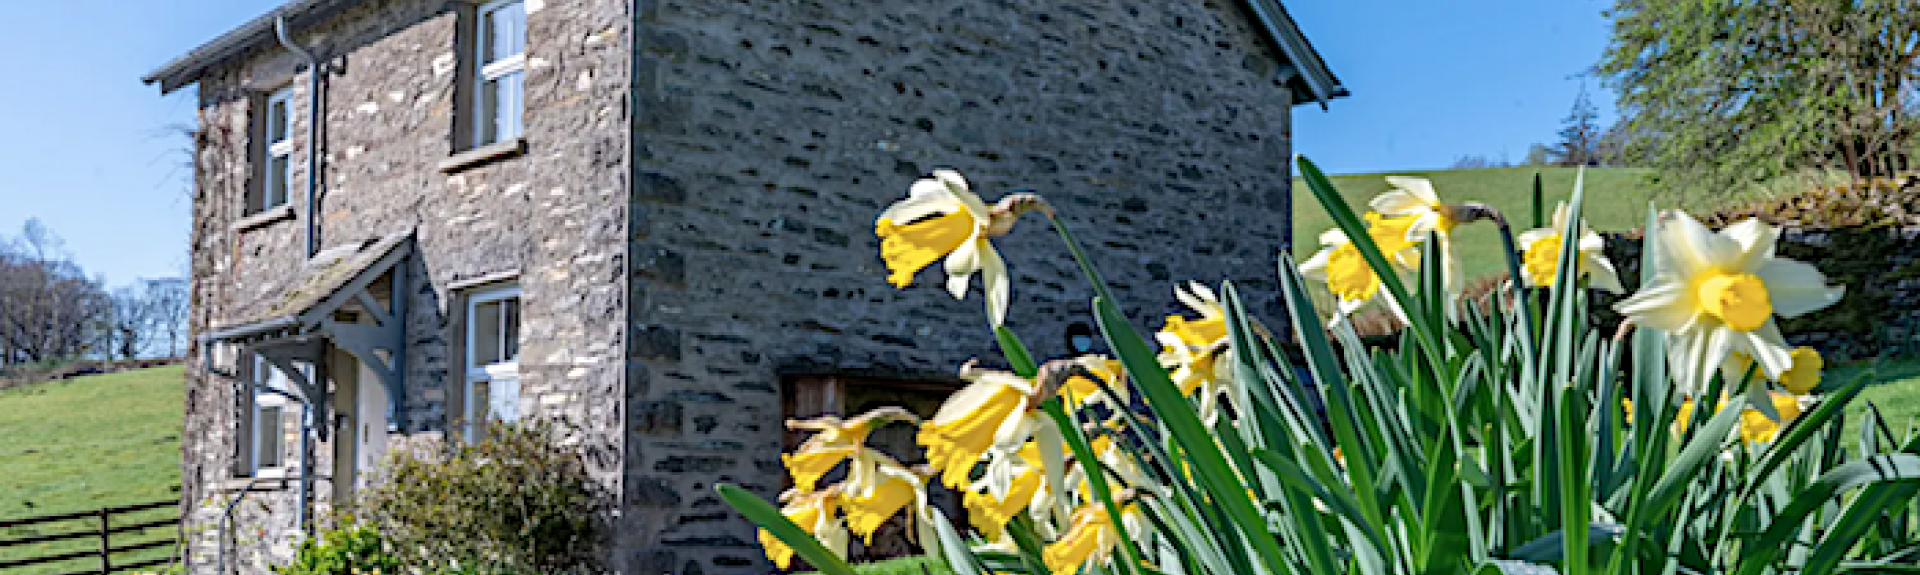 Daffodils grow in front of a stone-built barn conversion in the Cumbrian countryide